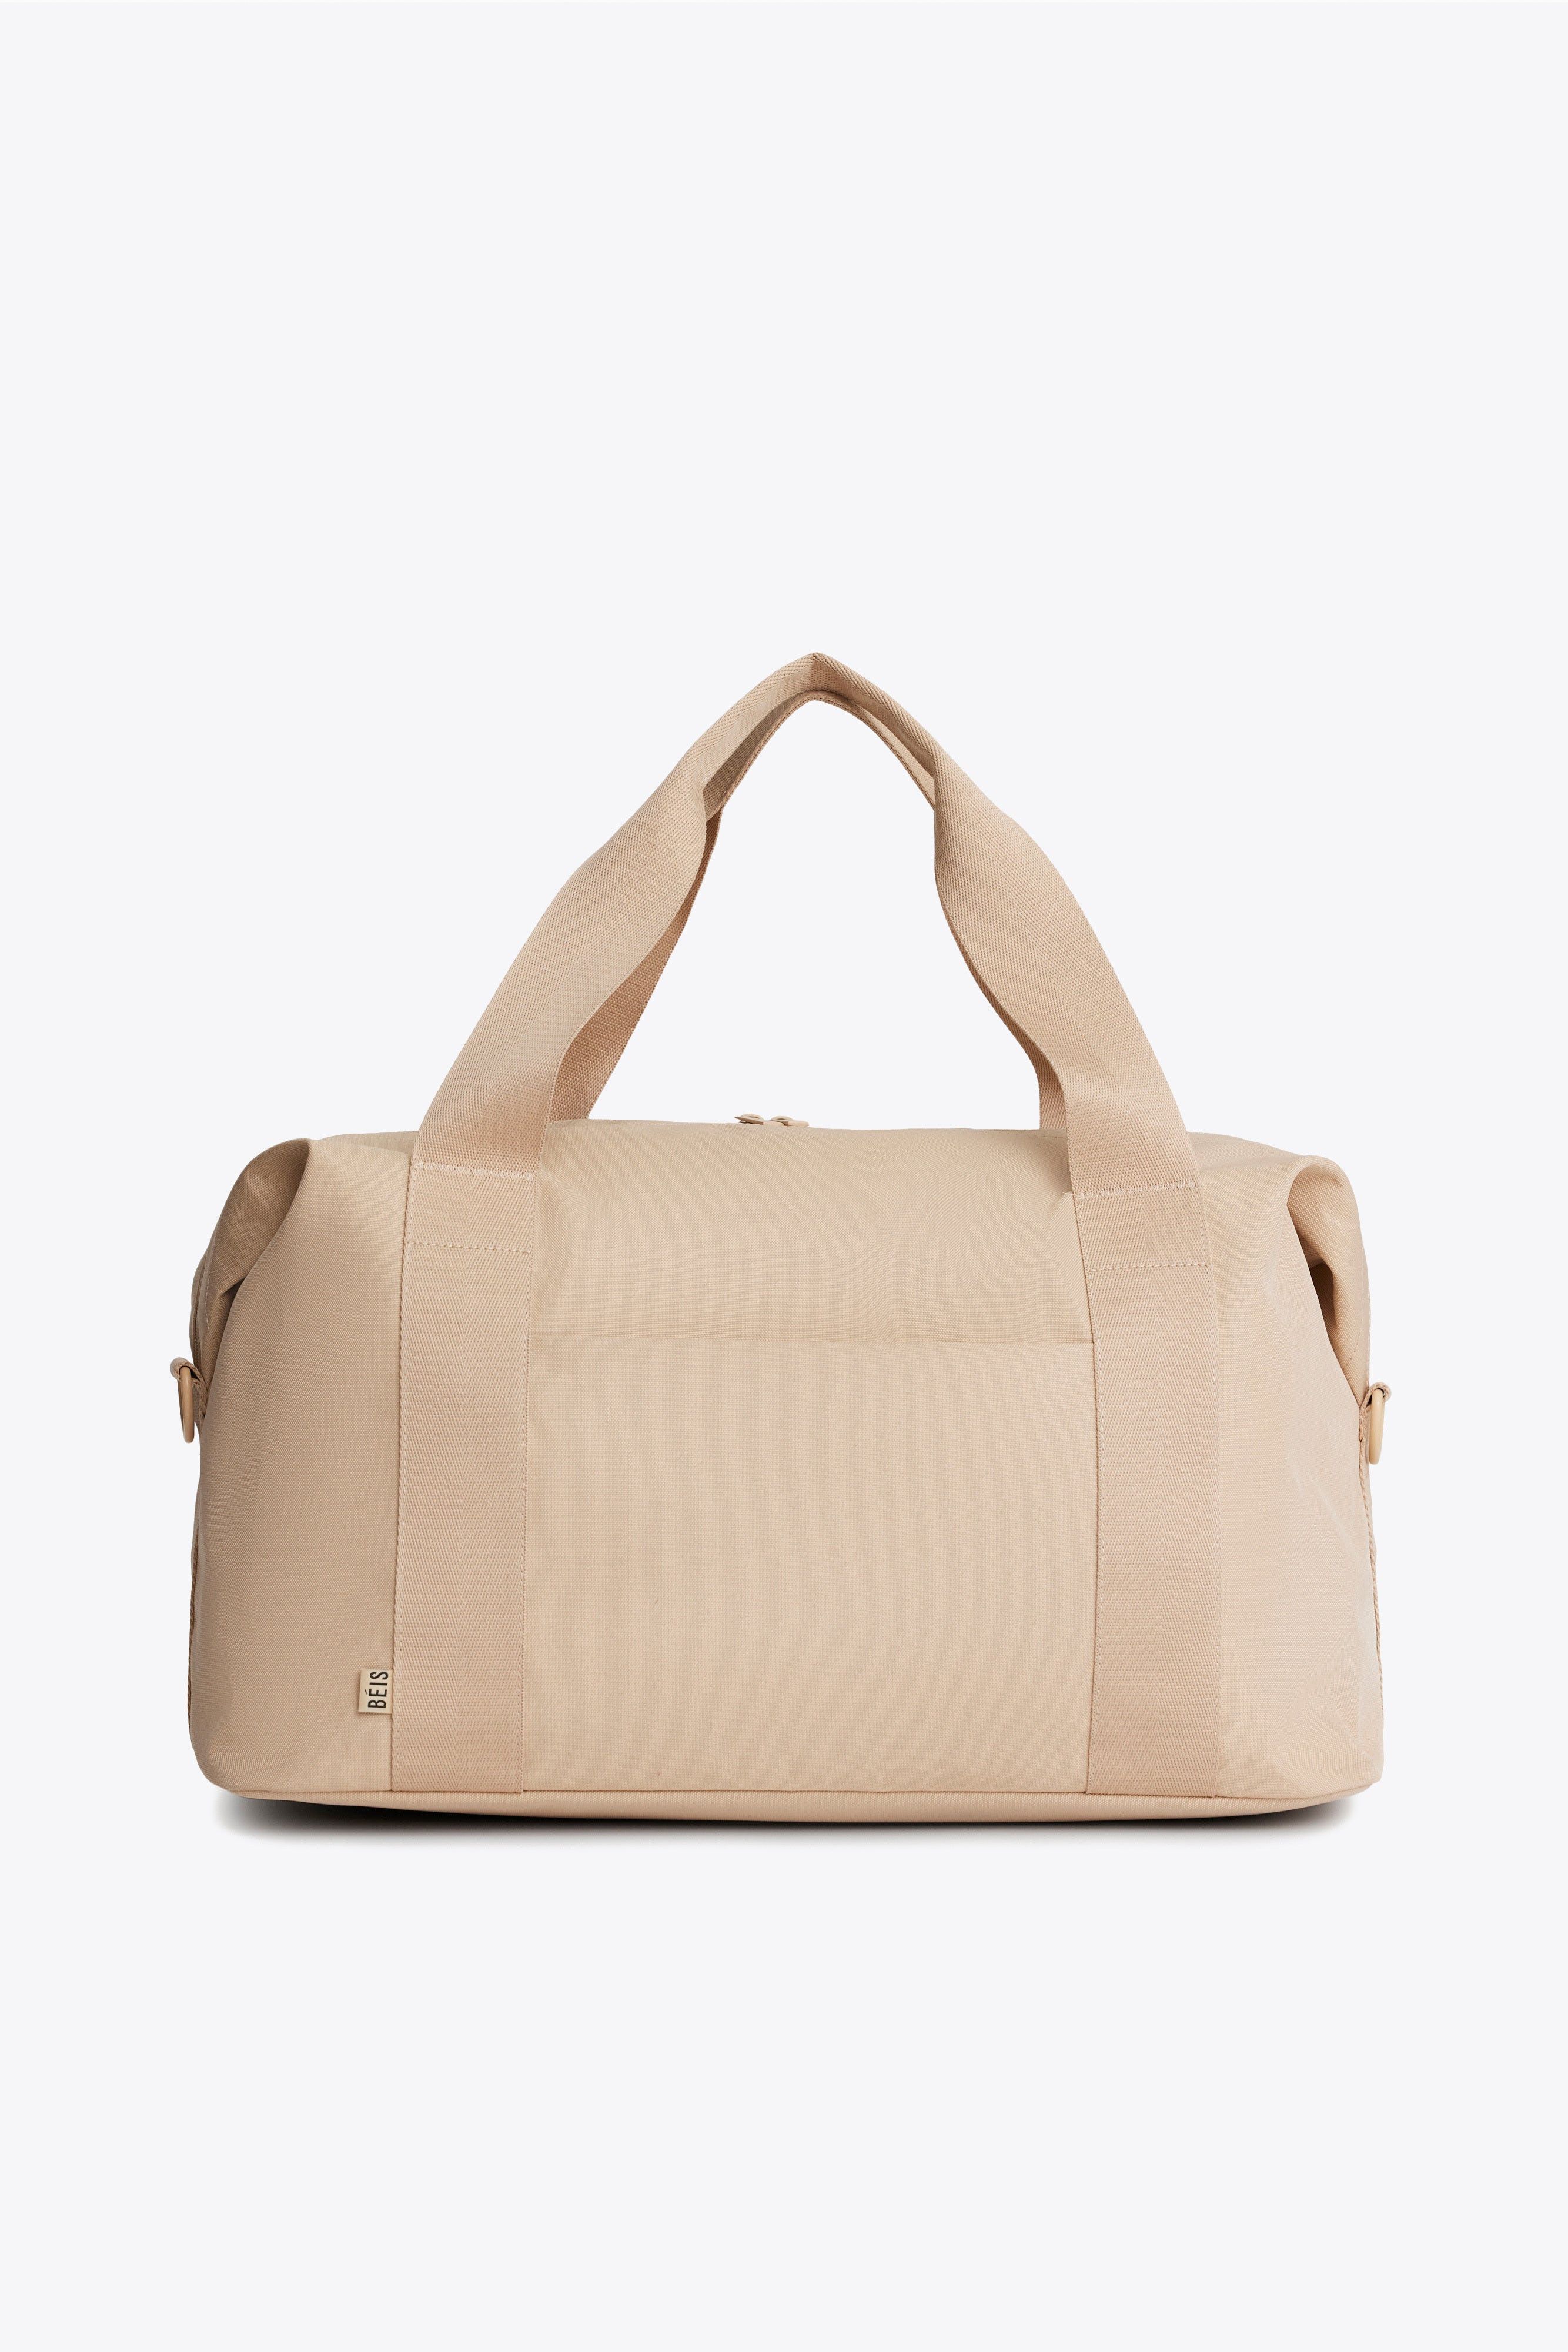 BÉIS 'The BEISICS Duffle' in Beige - Large Travel Duffle Bag in Beige | BÉIS Travel